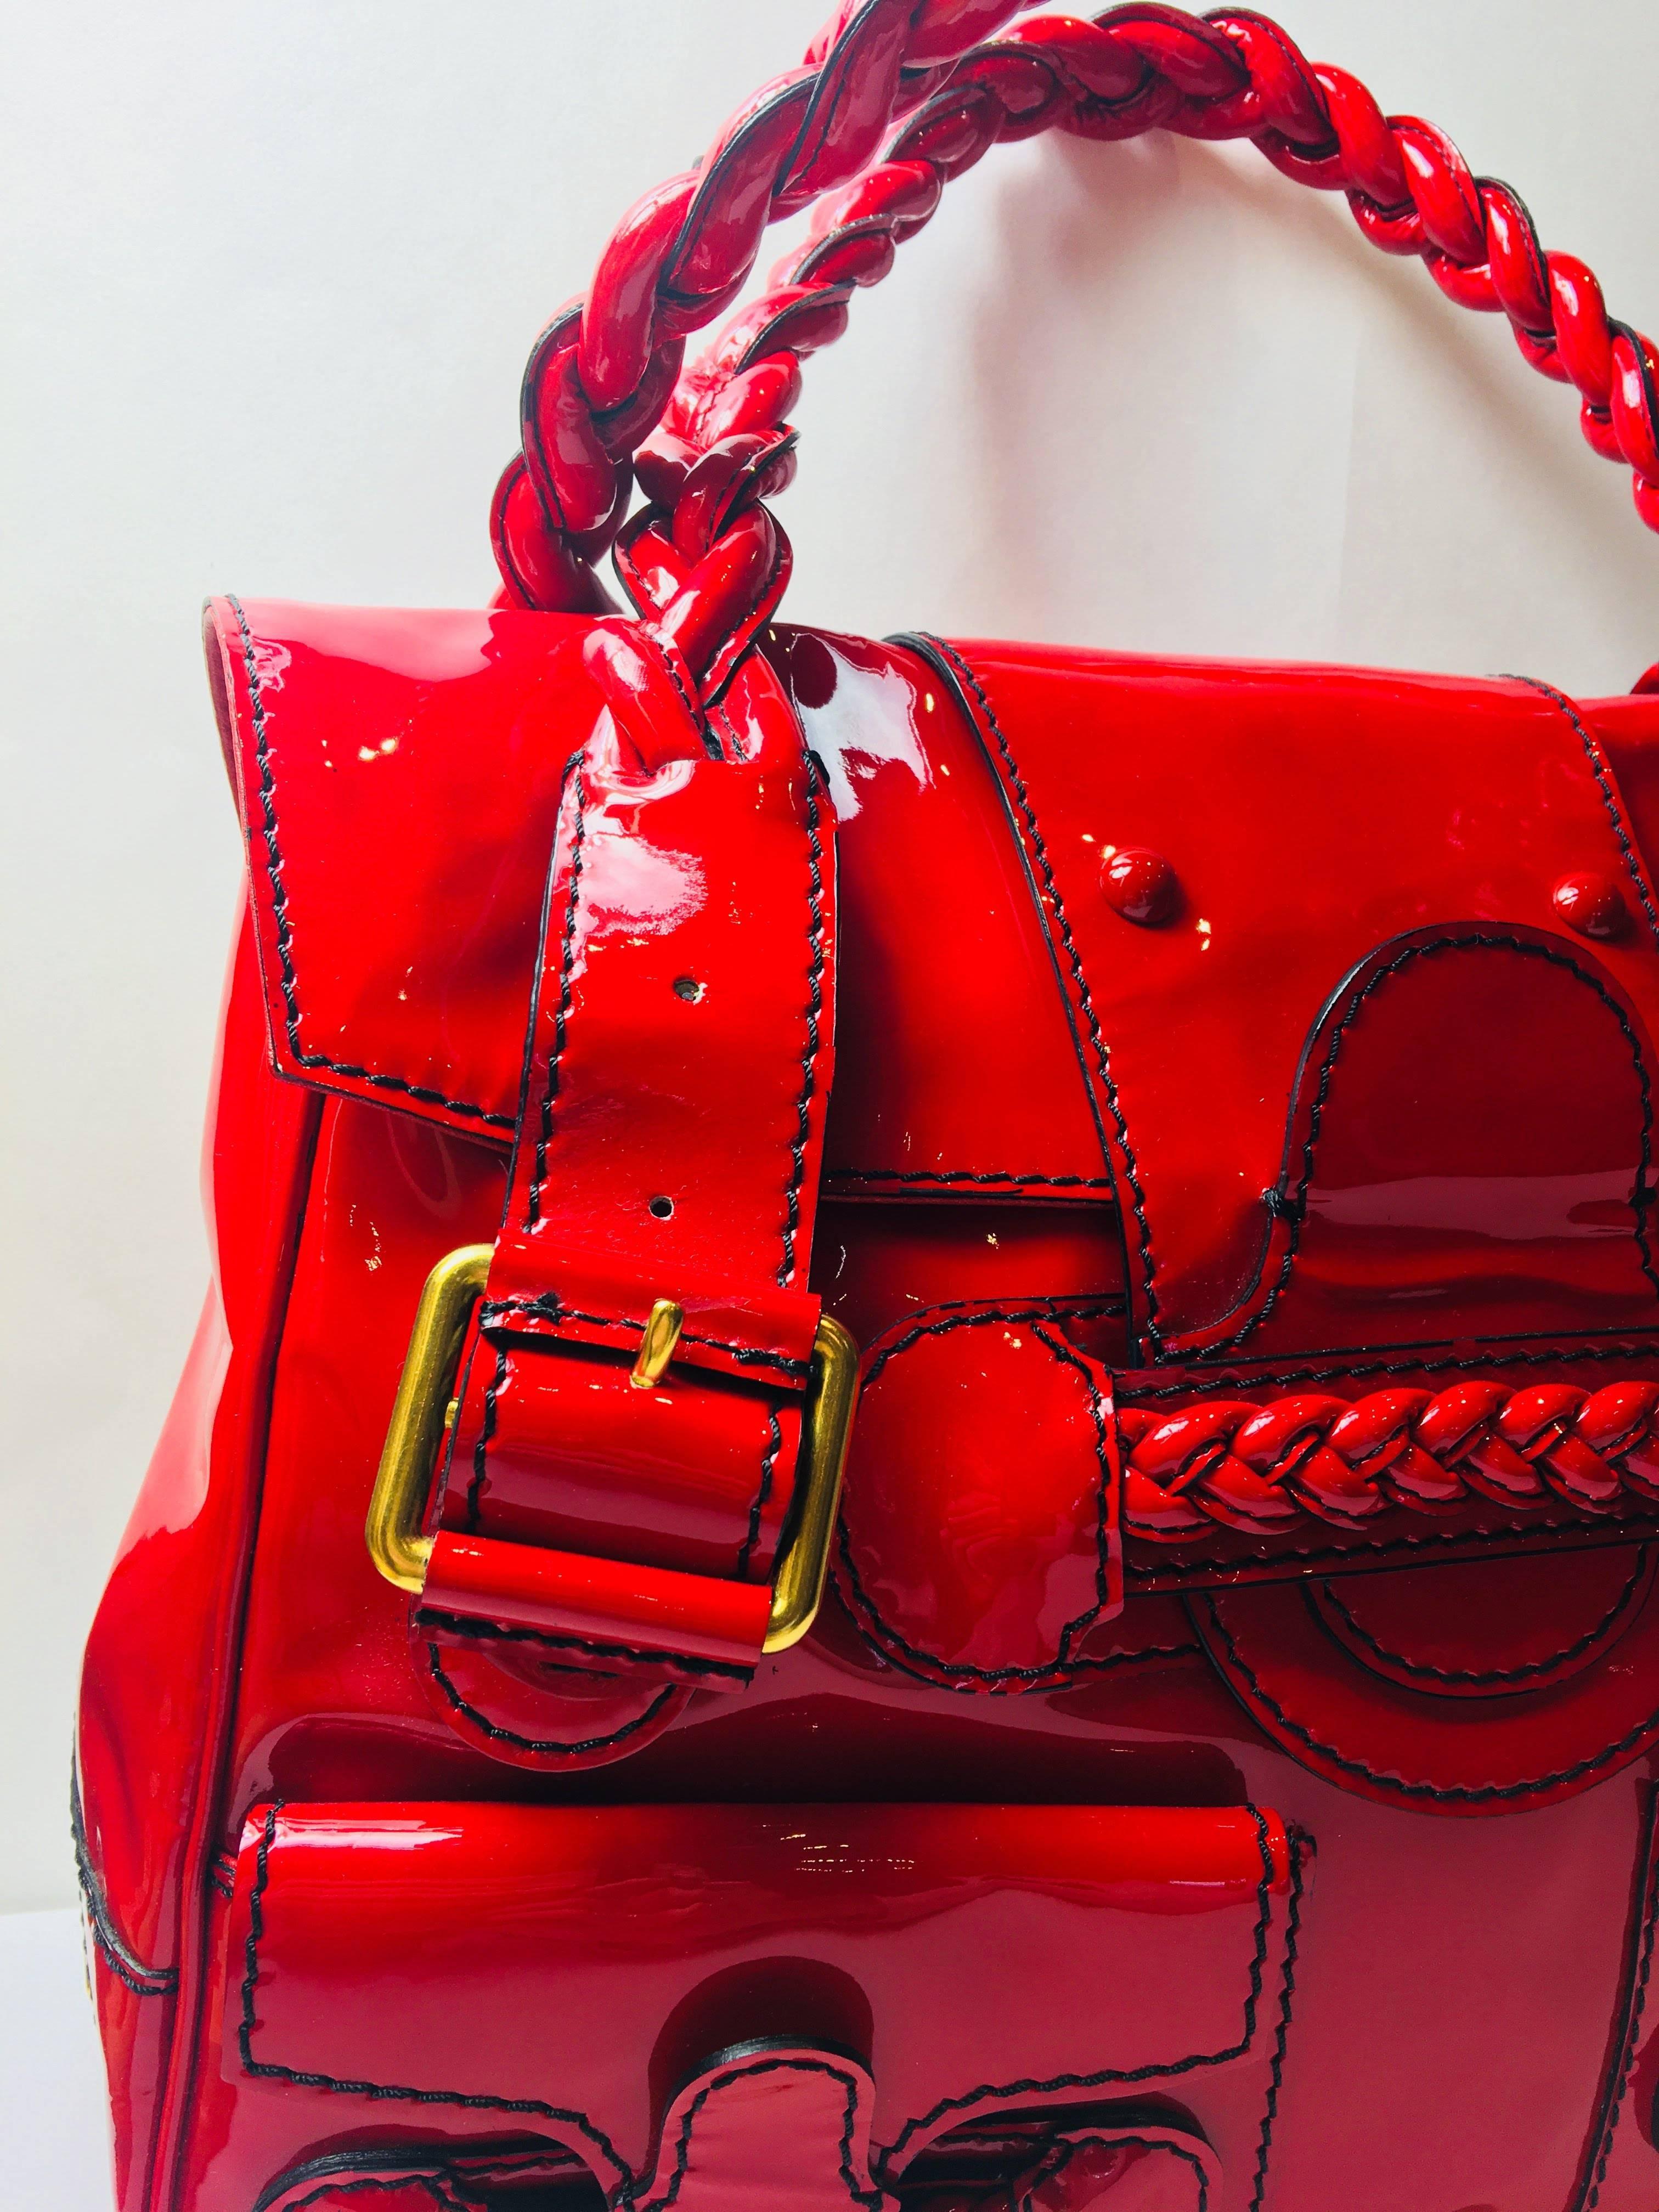 Valentino 'Histoire' Red Patent Leather Handbag with Braided Double Handle, Flap, and Gold Hardware